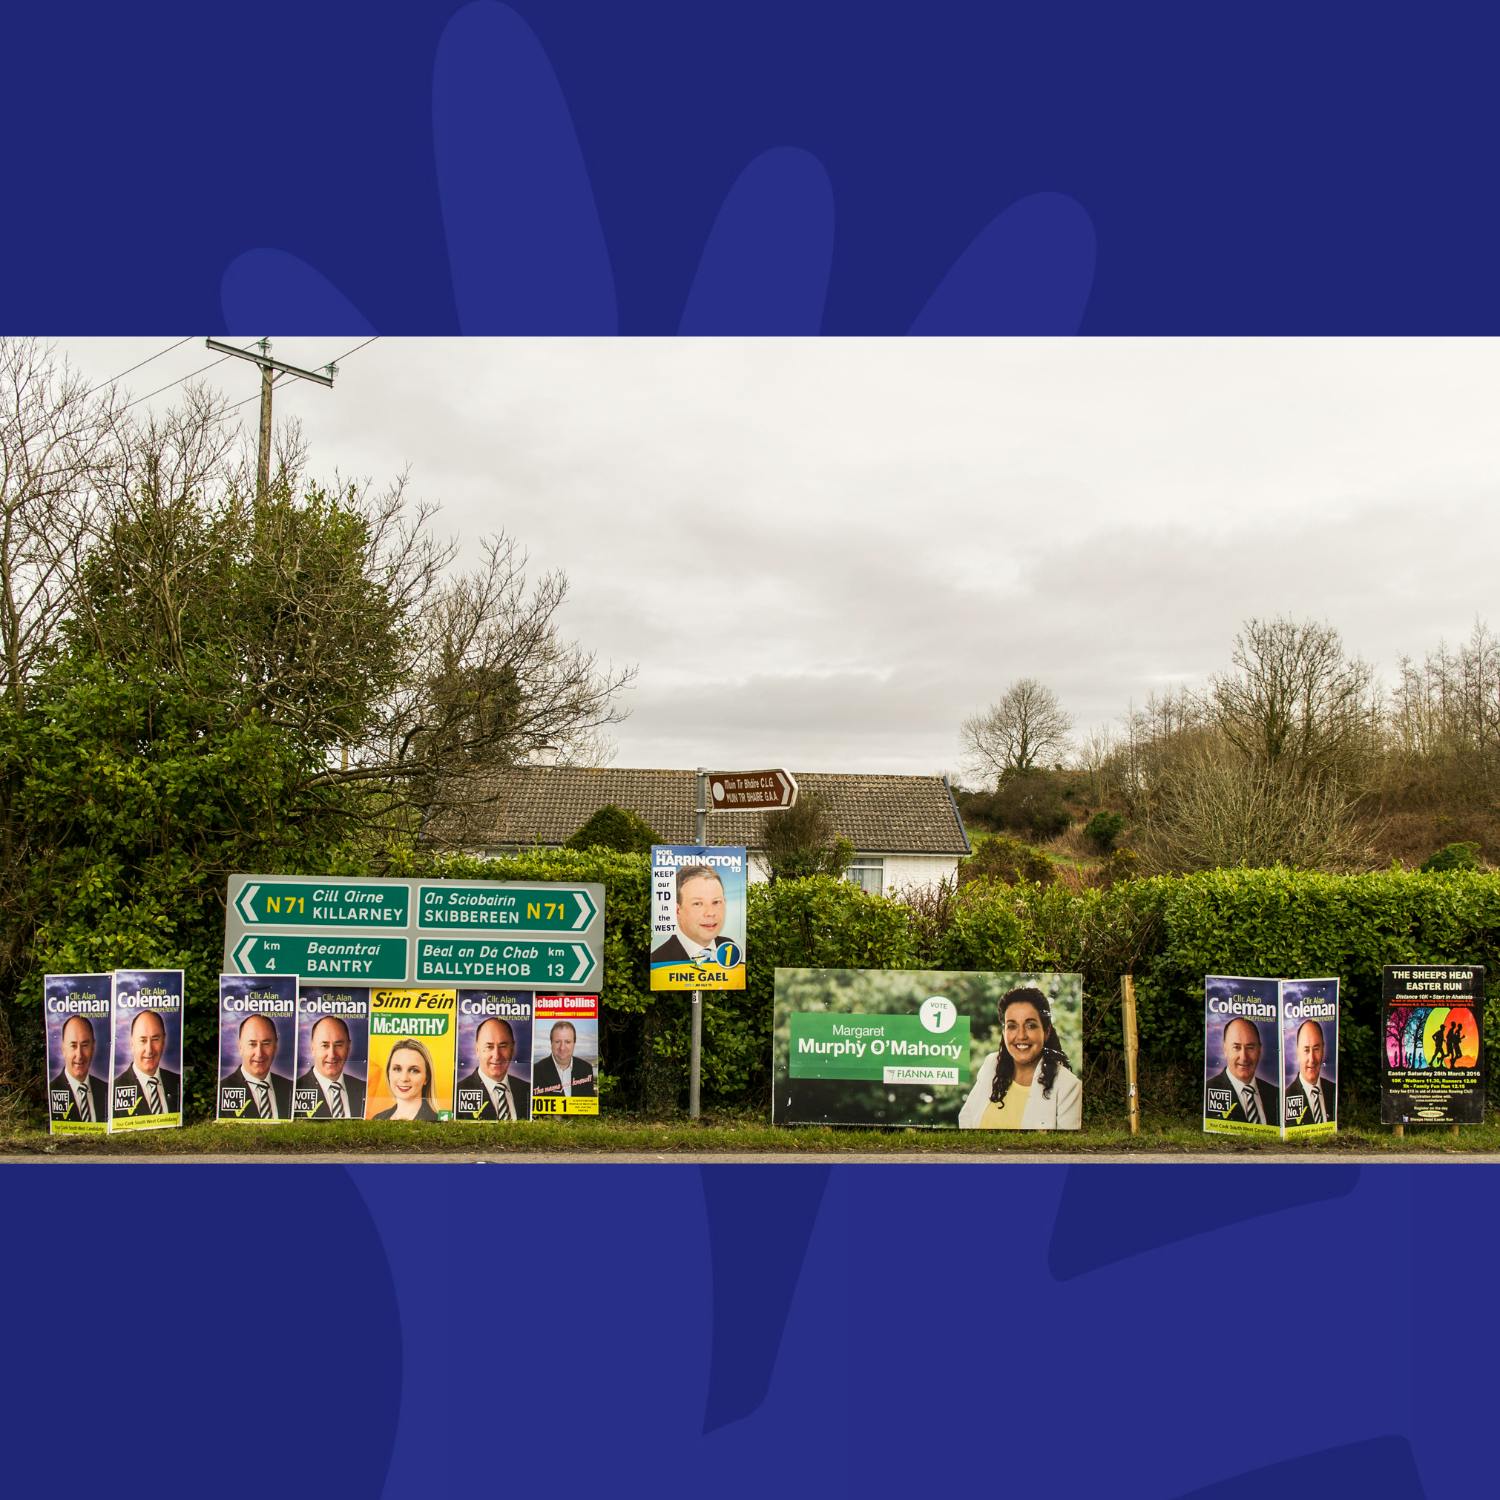 Has Online Advertising Become More Influential Than Election Posters?